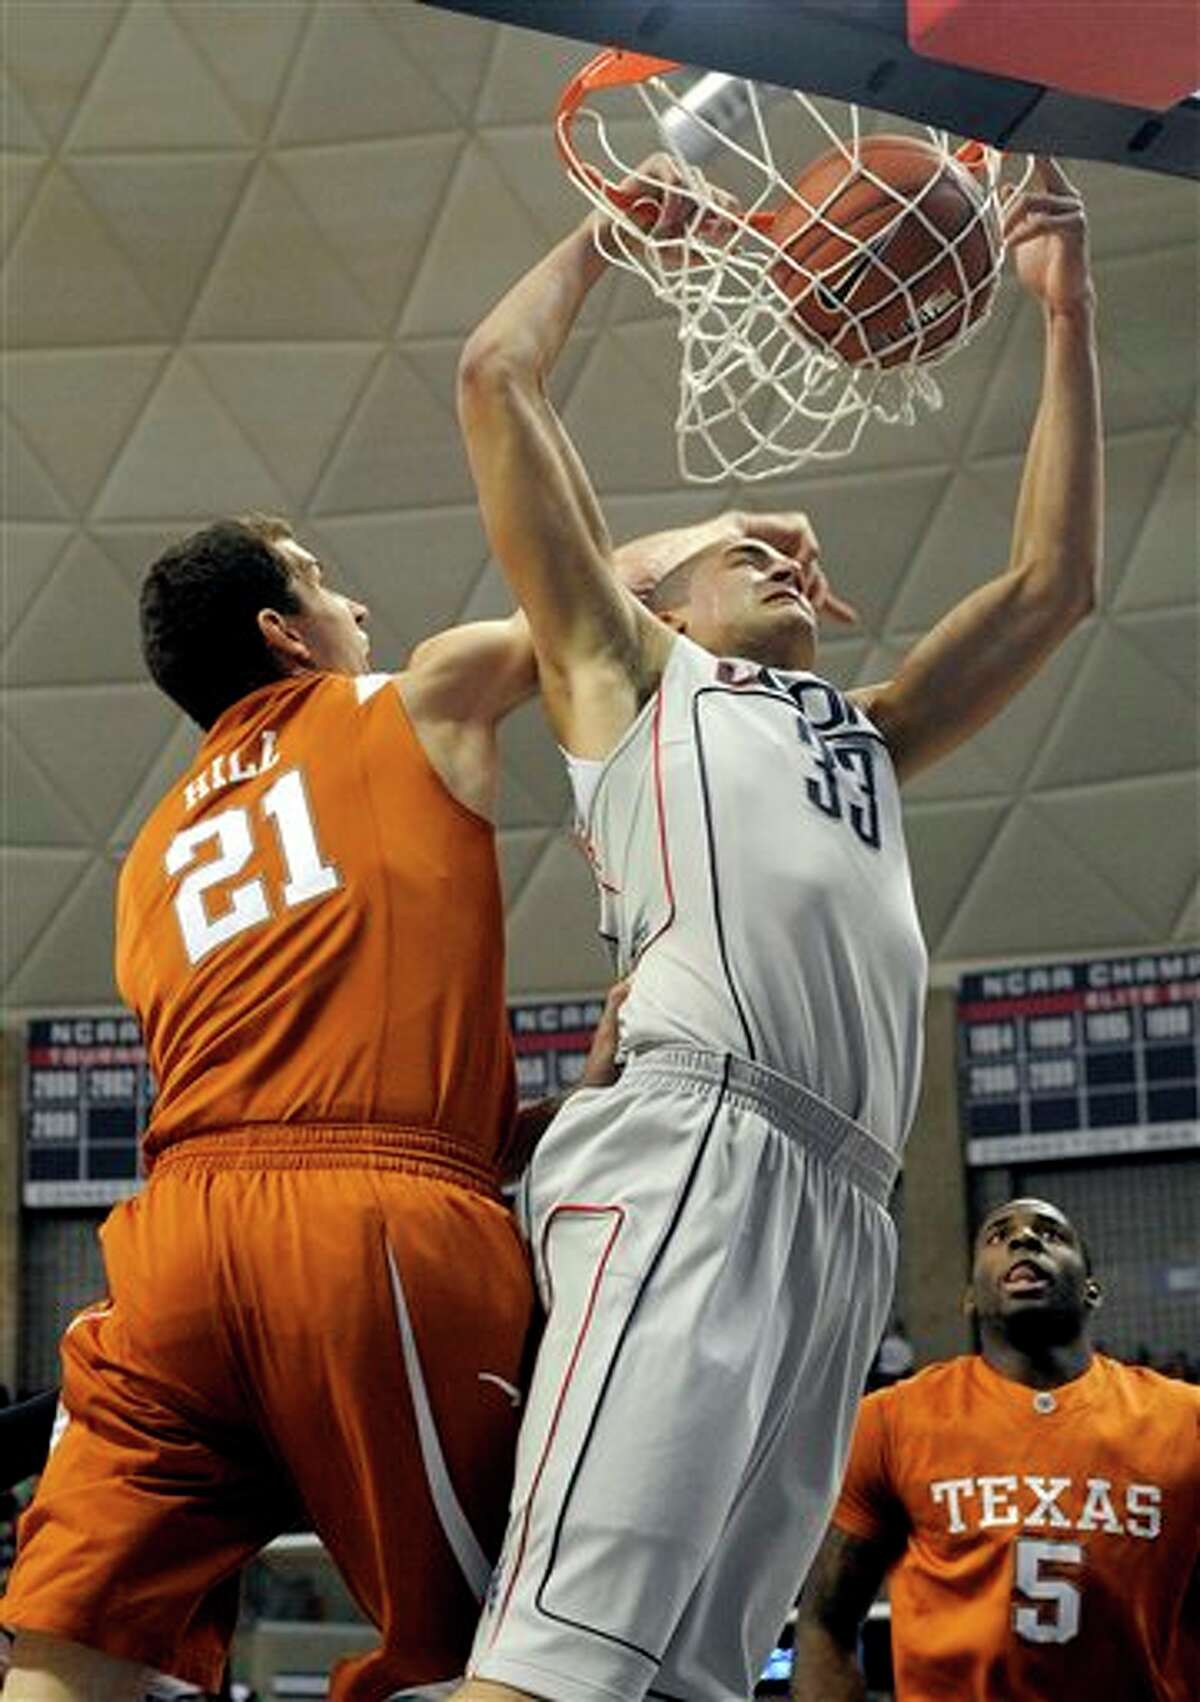 Texas's Matt Hill, left, fouls Connecticut's Gavin Edwards during the first half of their NCAA men's college basketball game in Storrs, Conn., on Saturday, Jan. 23, 2010. (AP Photo/Fred Beckham)